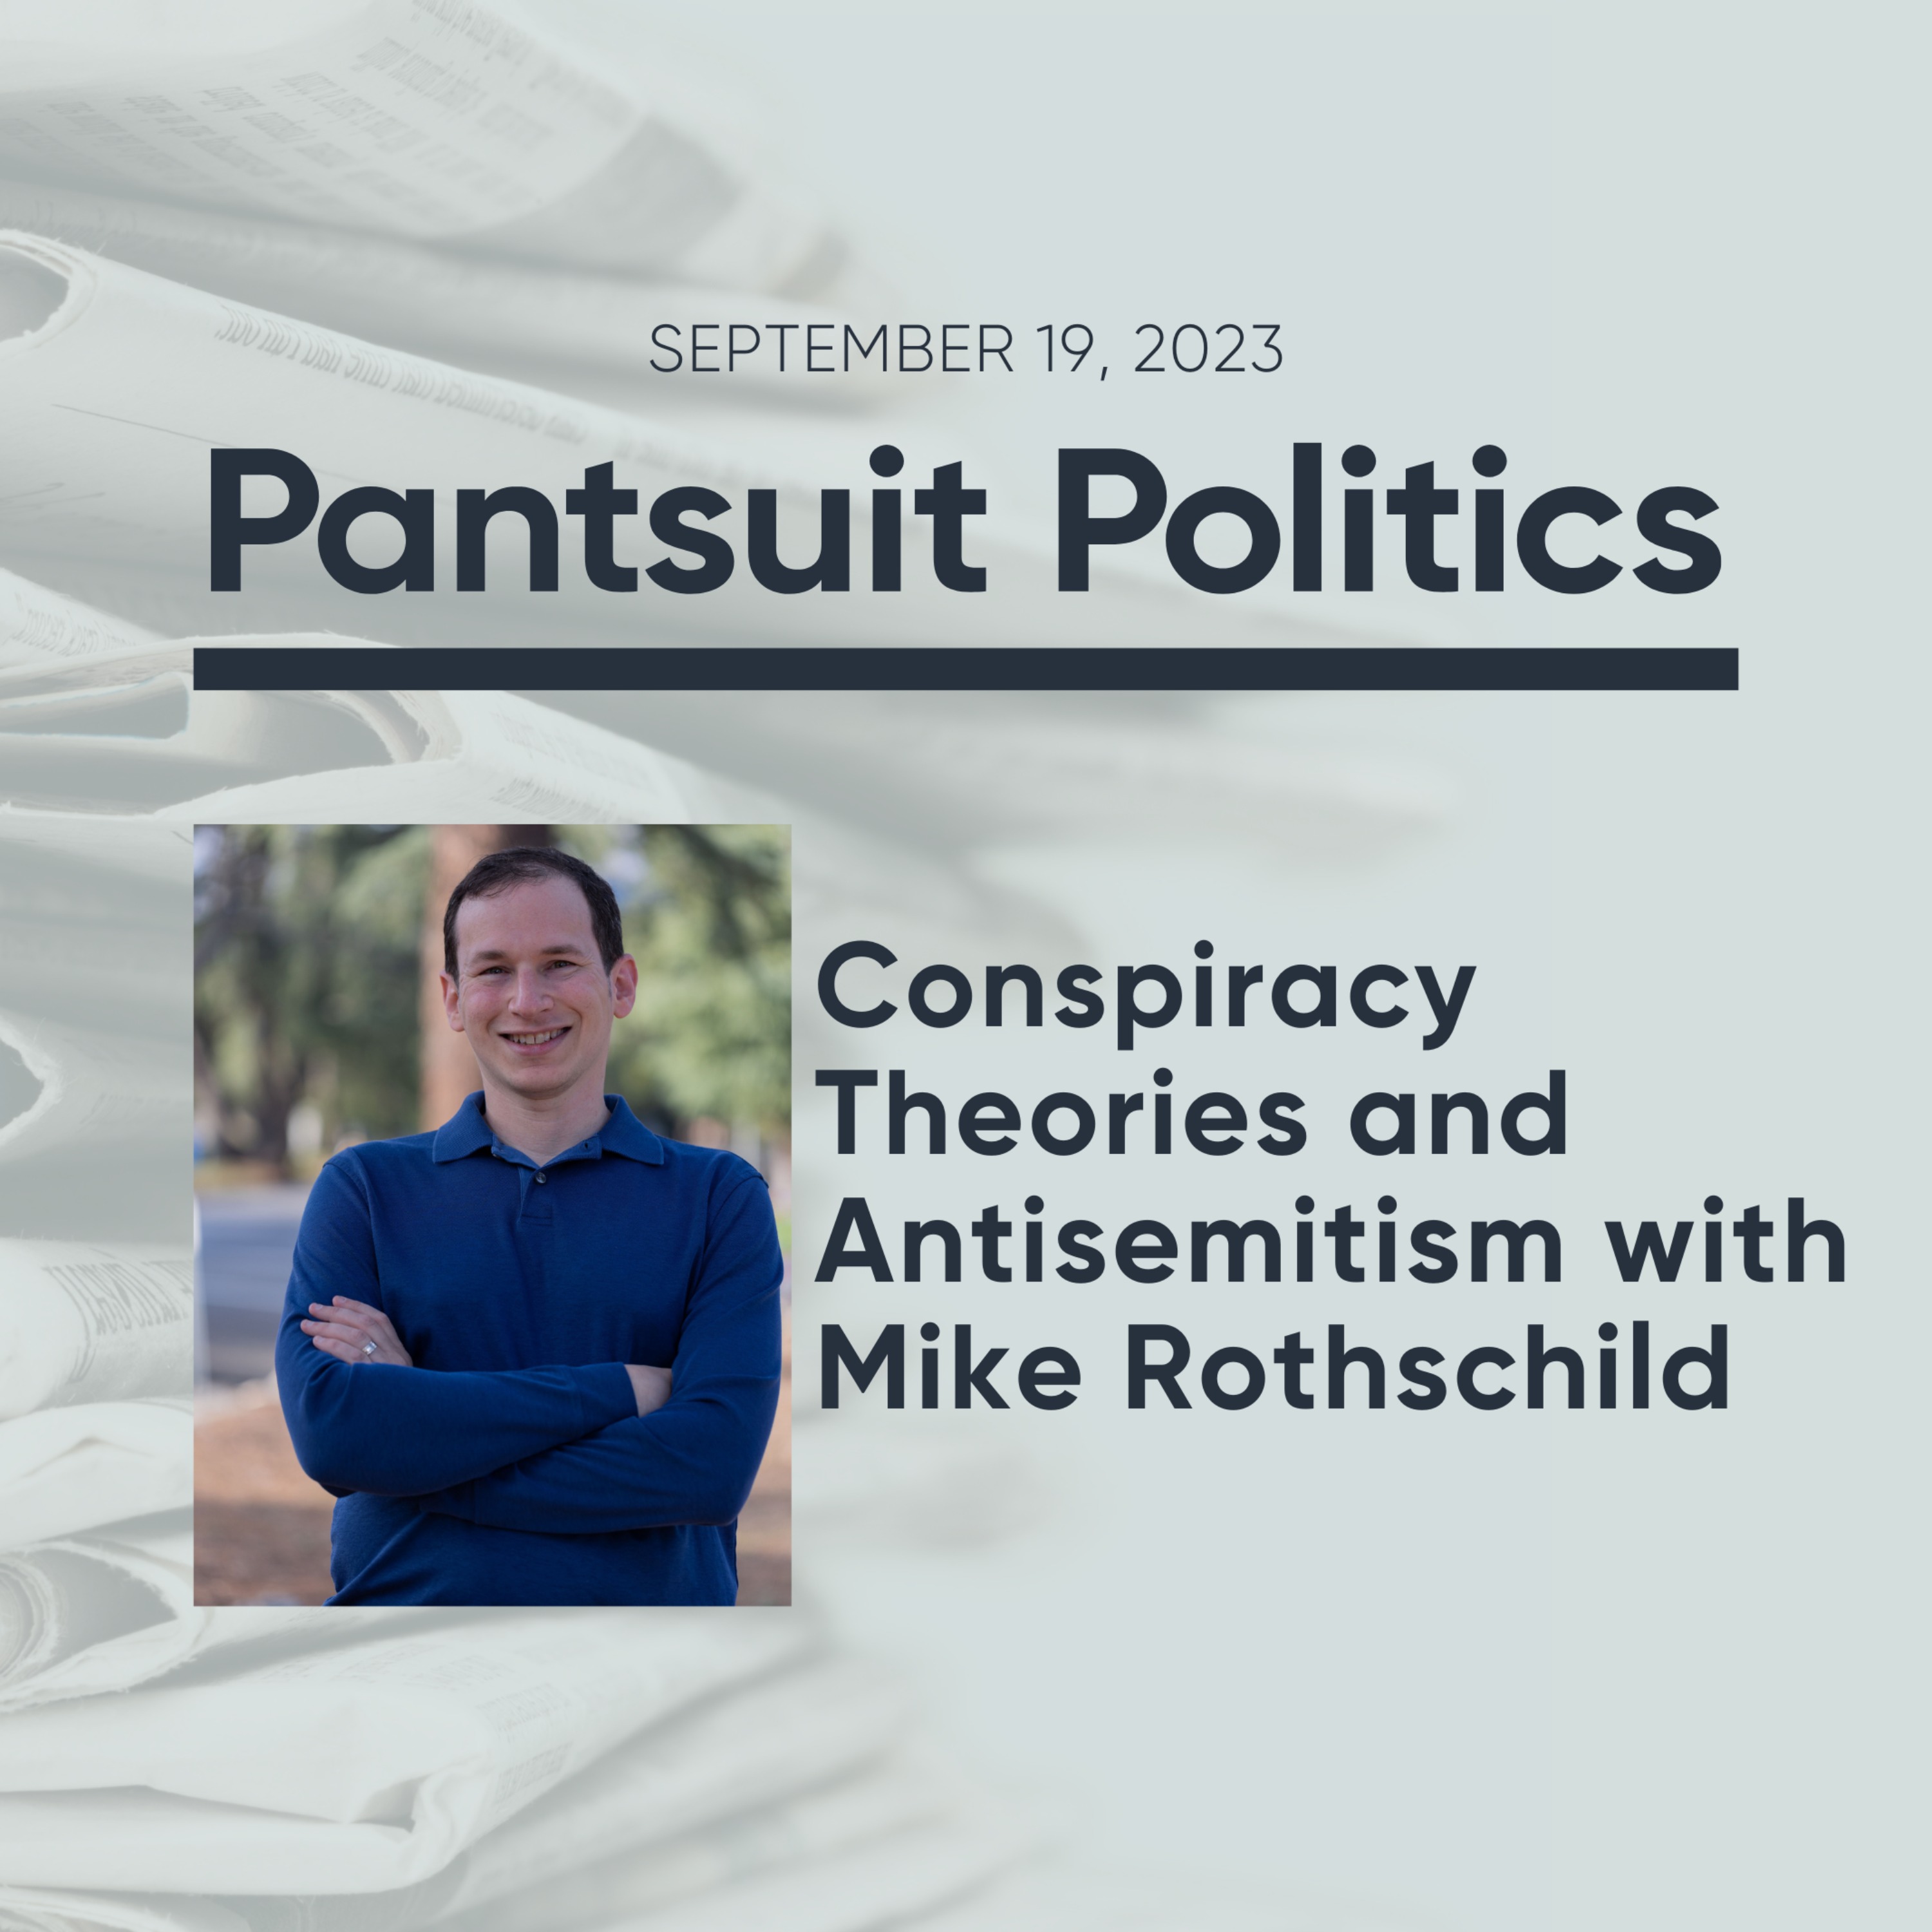 Conspiracy Theories and Antisemitism with Mike Rothschild